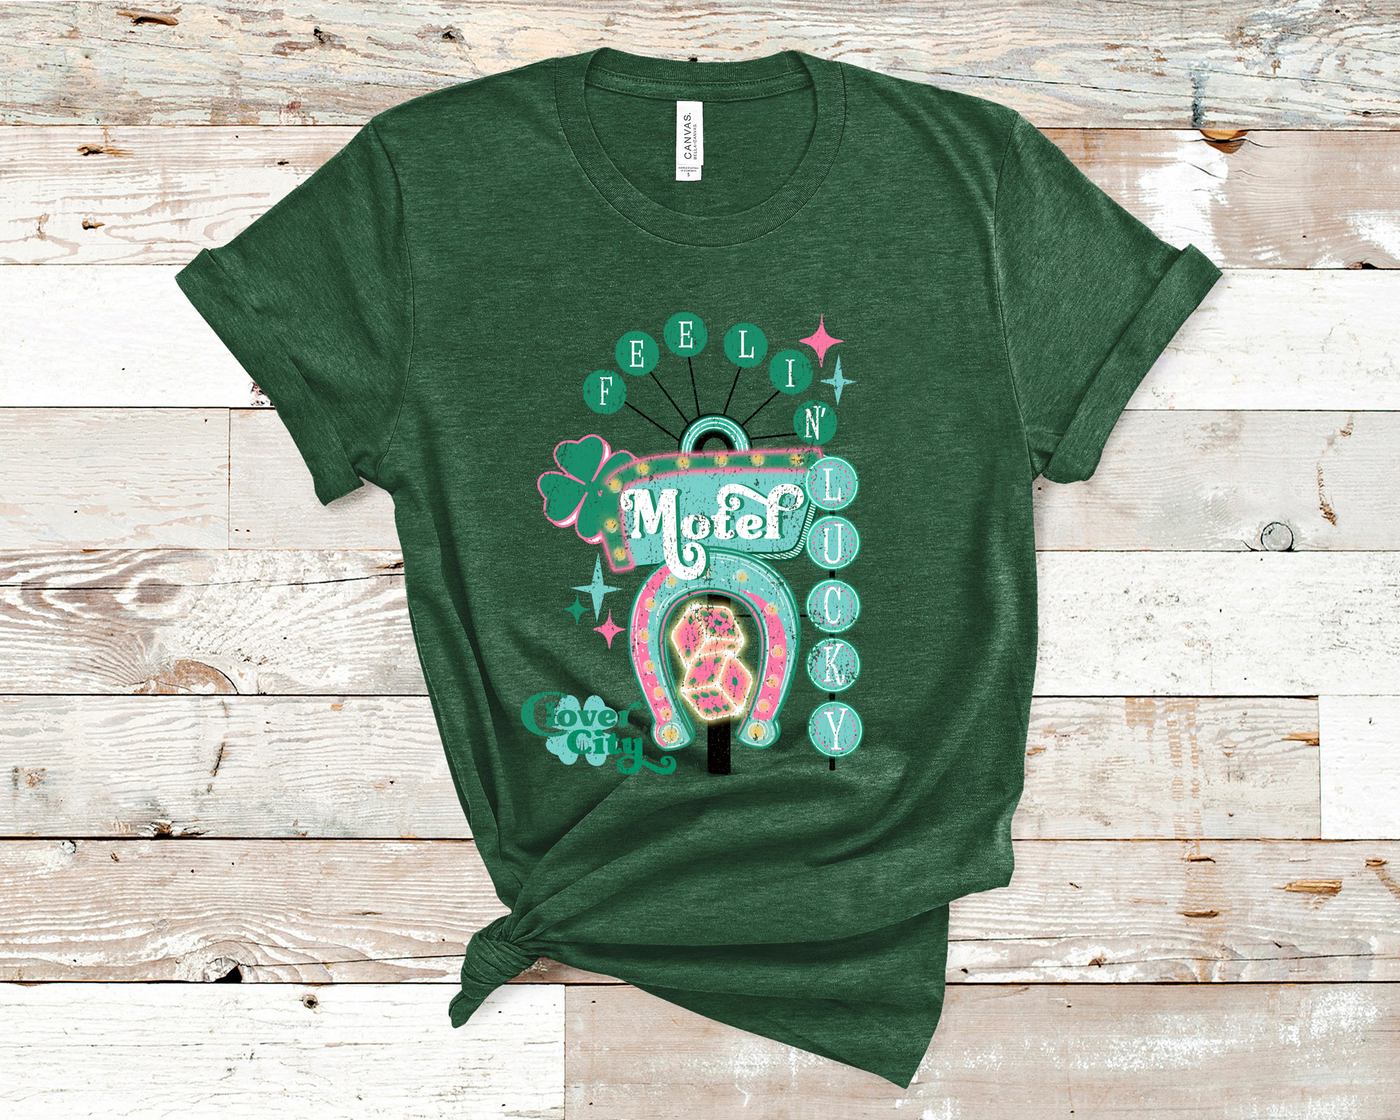 Grass Green Tee. Graphic of a vintage Neon Sign The word feeling with each letter in green circles at the top with the word lucky down the side with each letter in a turquoise circle. There is a sign in the center with the word motel in it, underneath there is a horse shoe with dice inside at he bottom of the sign. There is also a four leaf clover with the word clover city over it in green.